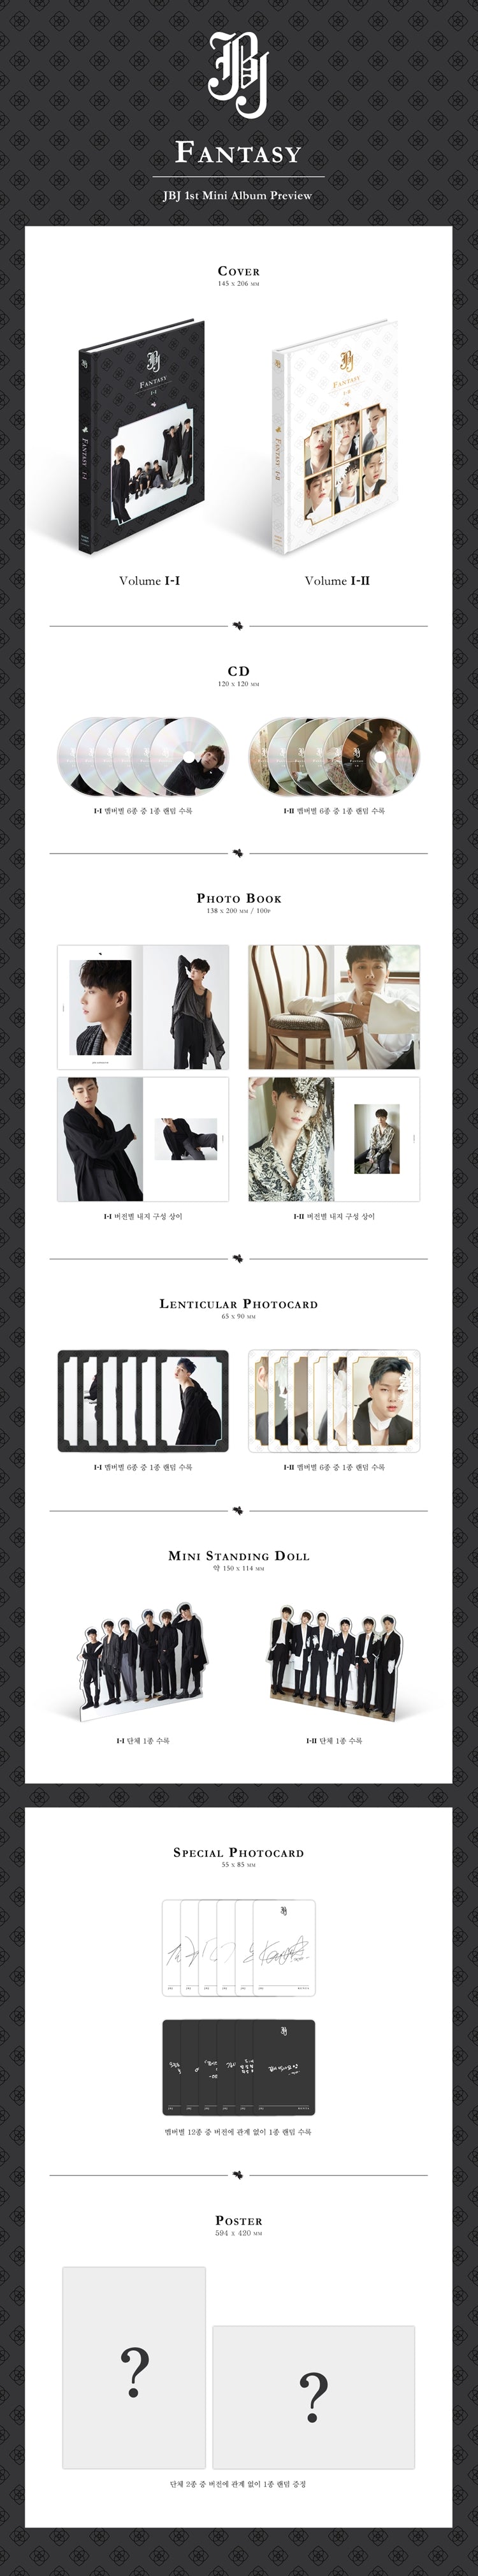 1 CD
1 Photo Book
1 Lenticular Photo Card
1 Mini Standing Doll
1 Special Photo Card